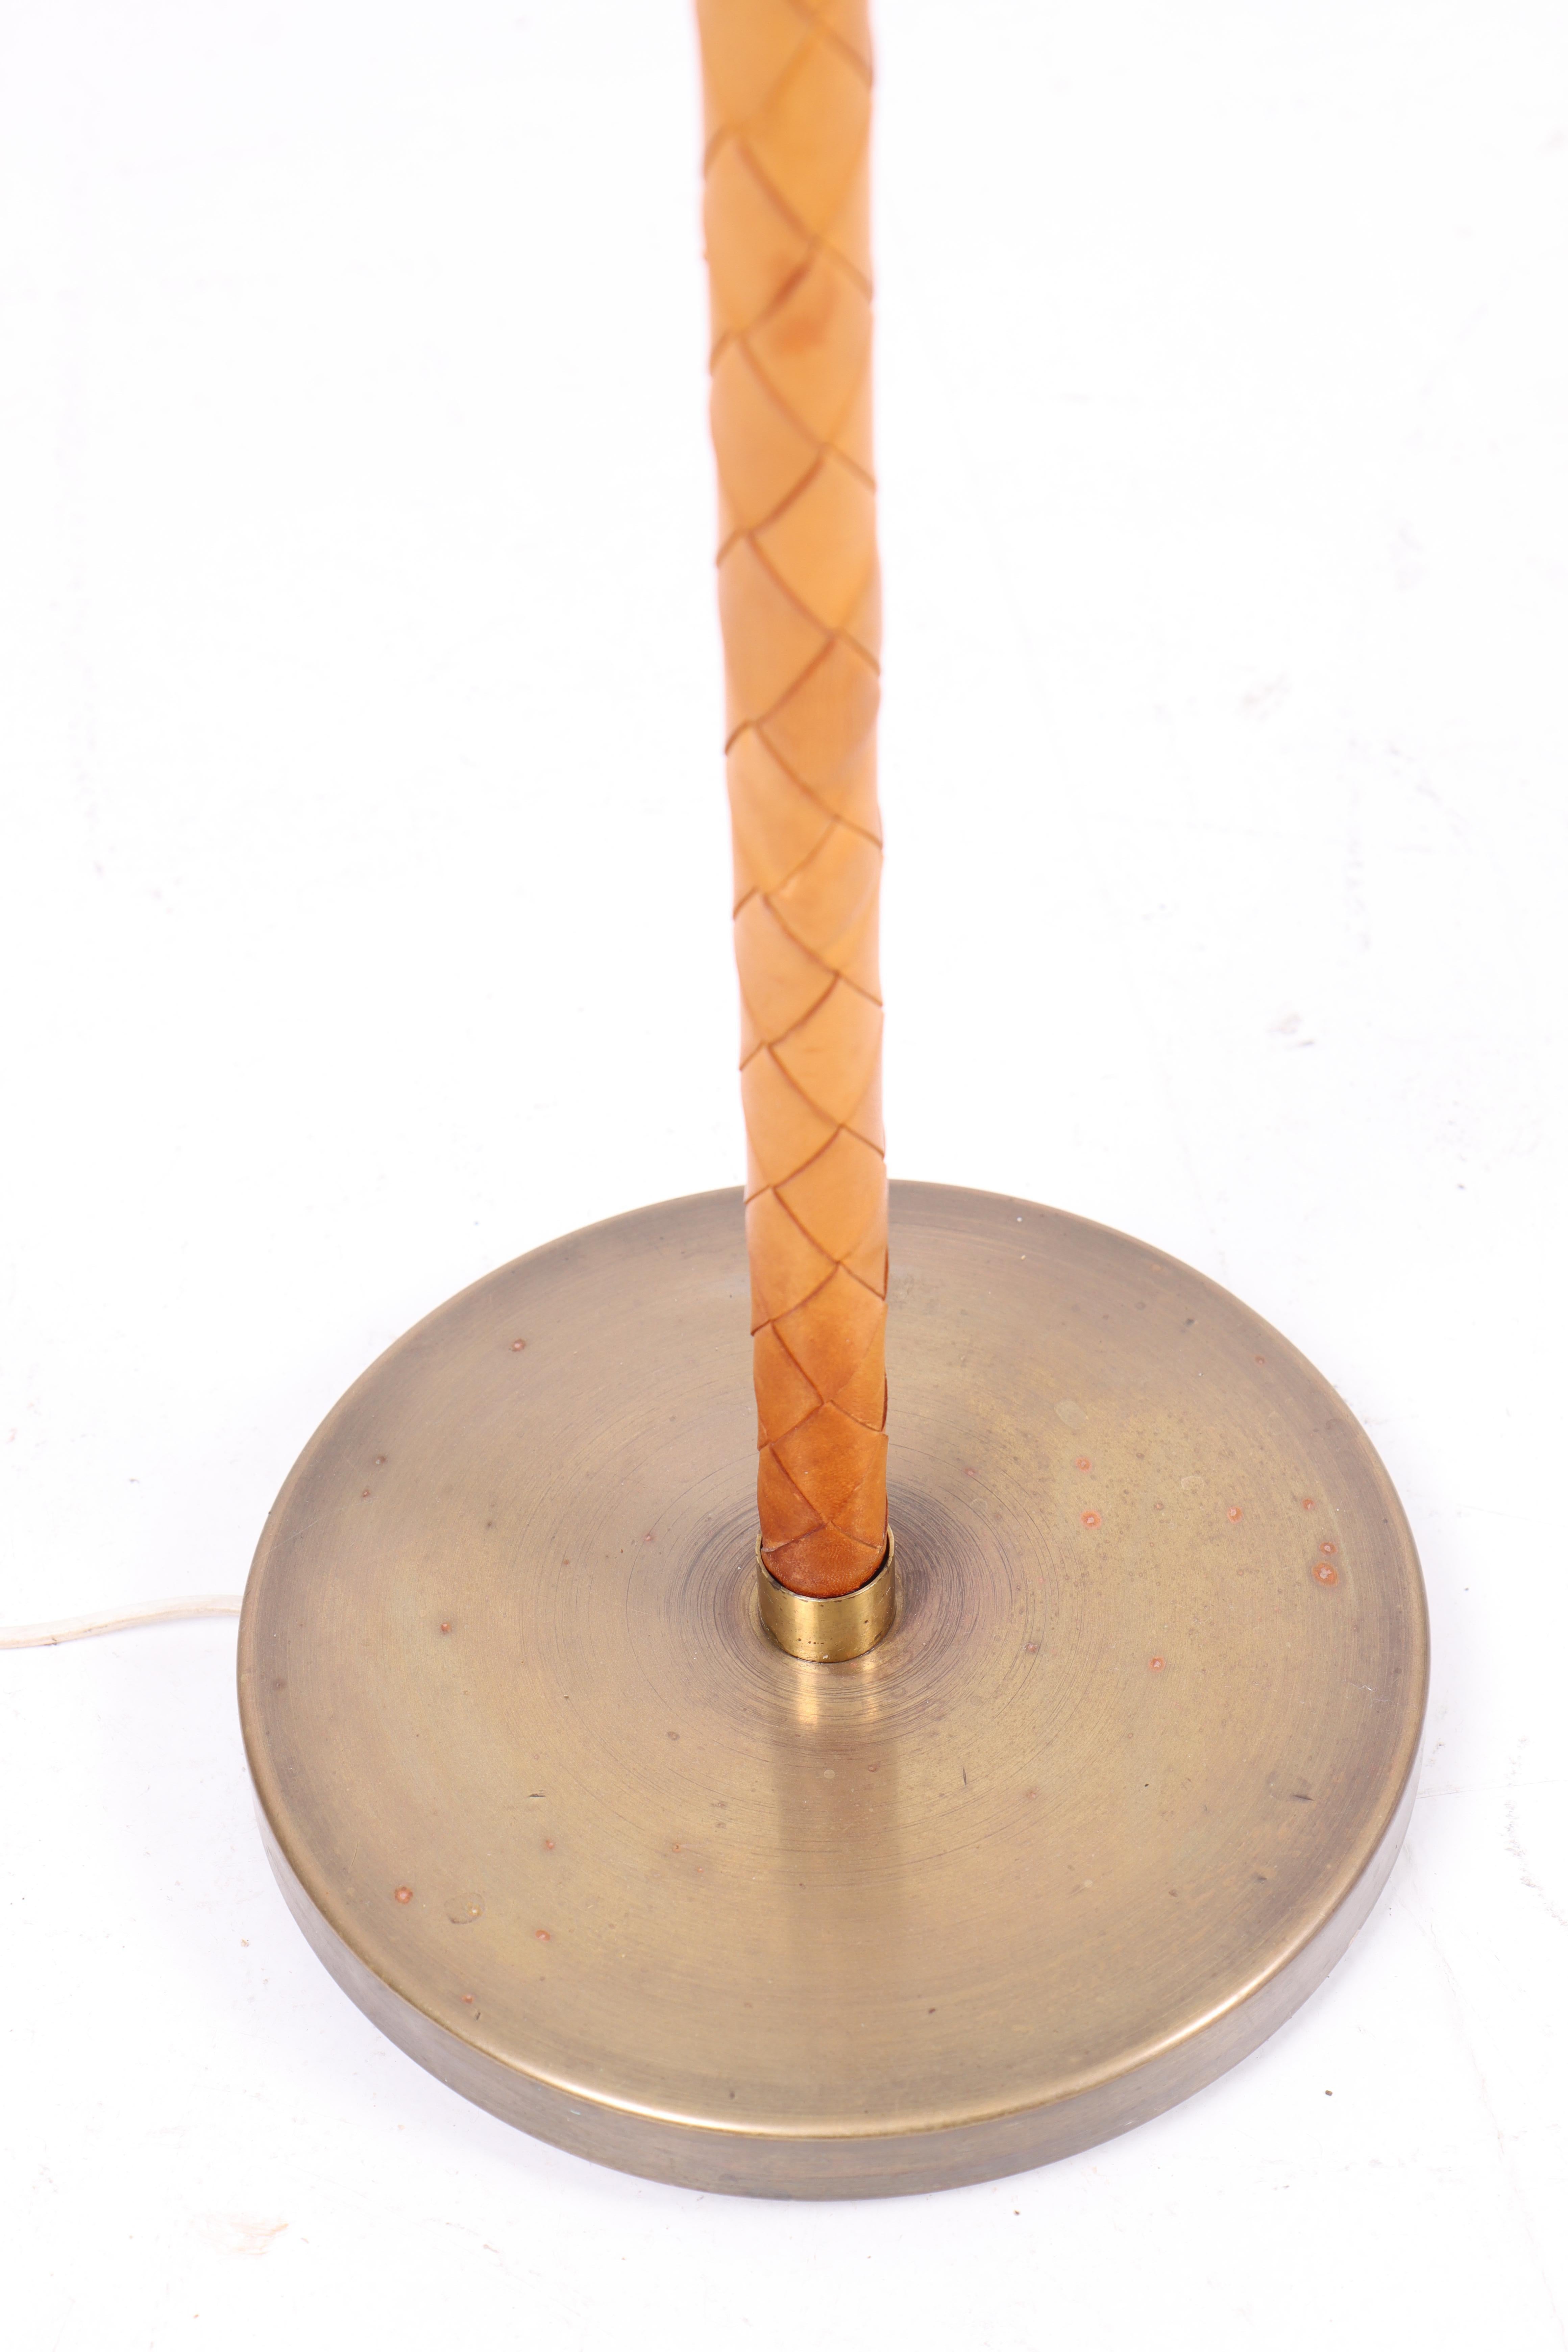 Danish Midcentury Floor Lamp in Brass and Leather, Made in Denmark, 1960s For Sale